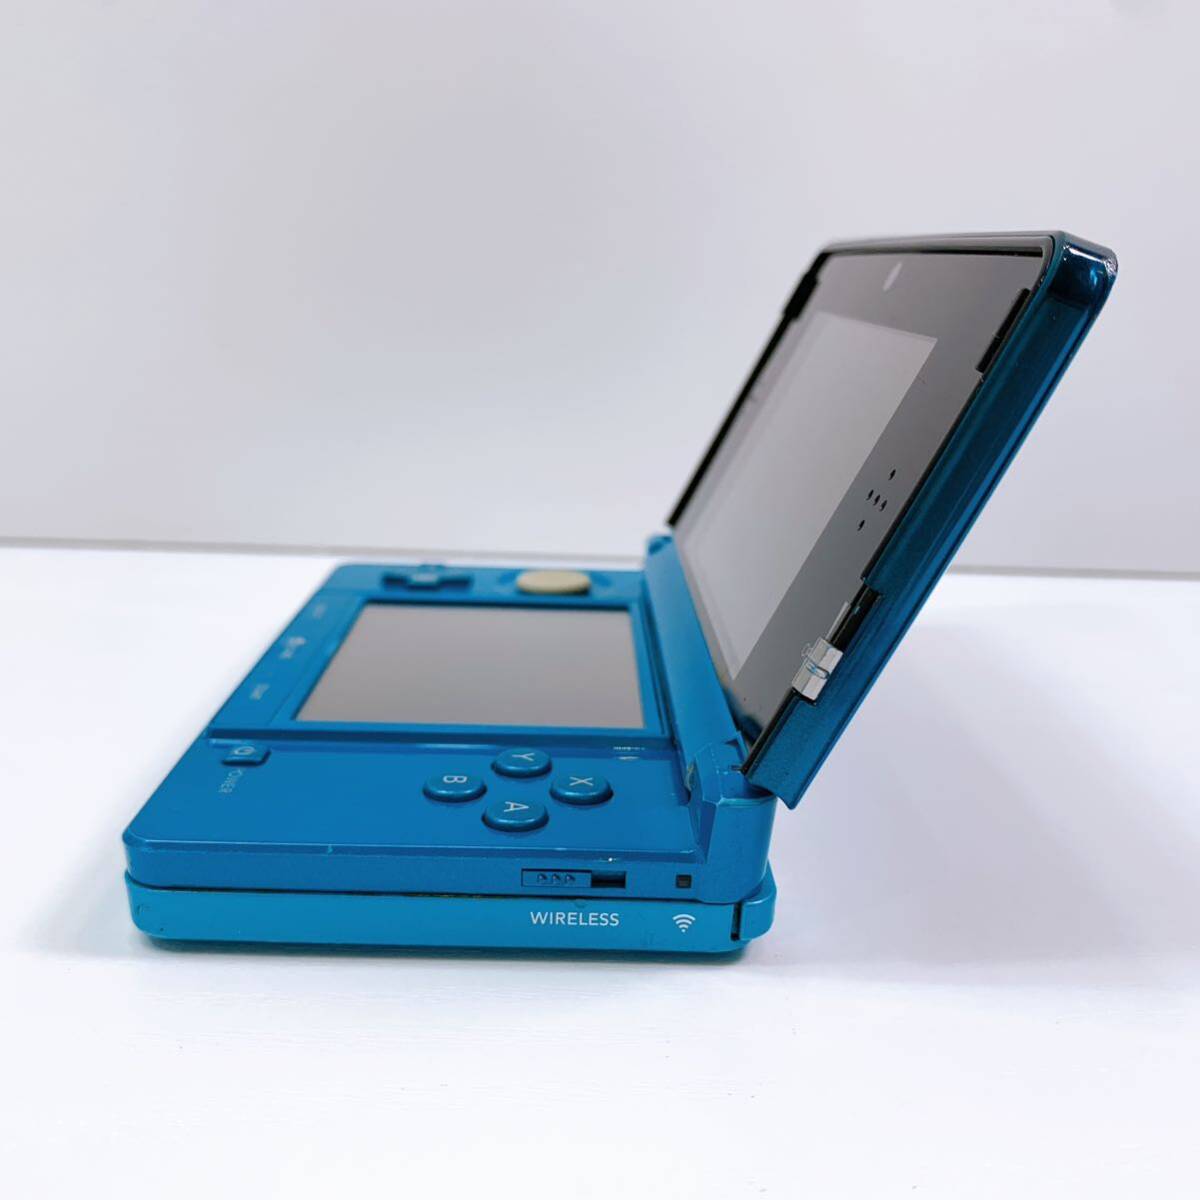 153[ used ]Nintendo 3DS body CTR-001 aqua blue Nintendo 3DS touch pen none nintendo game the first period . ending Junk present condition goods 